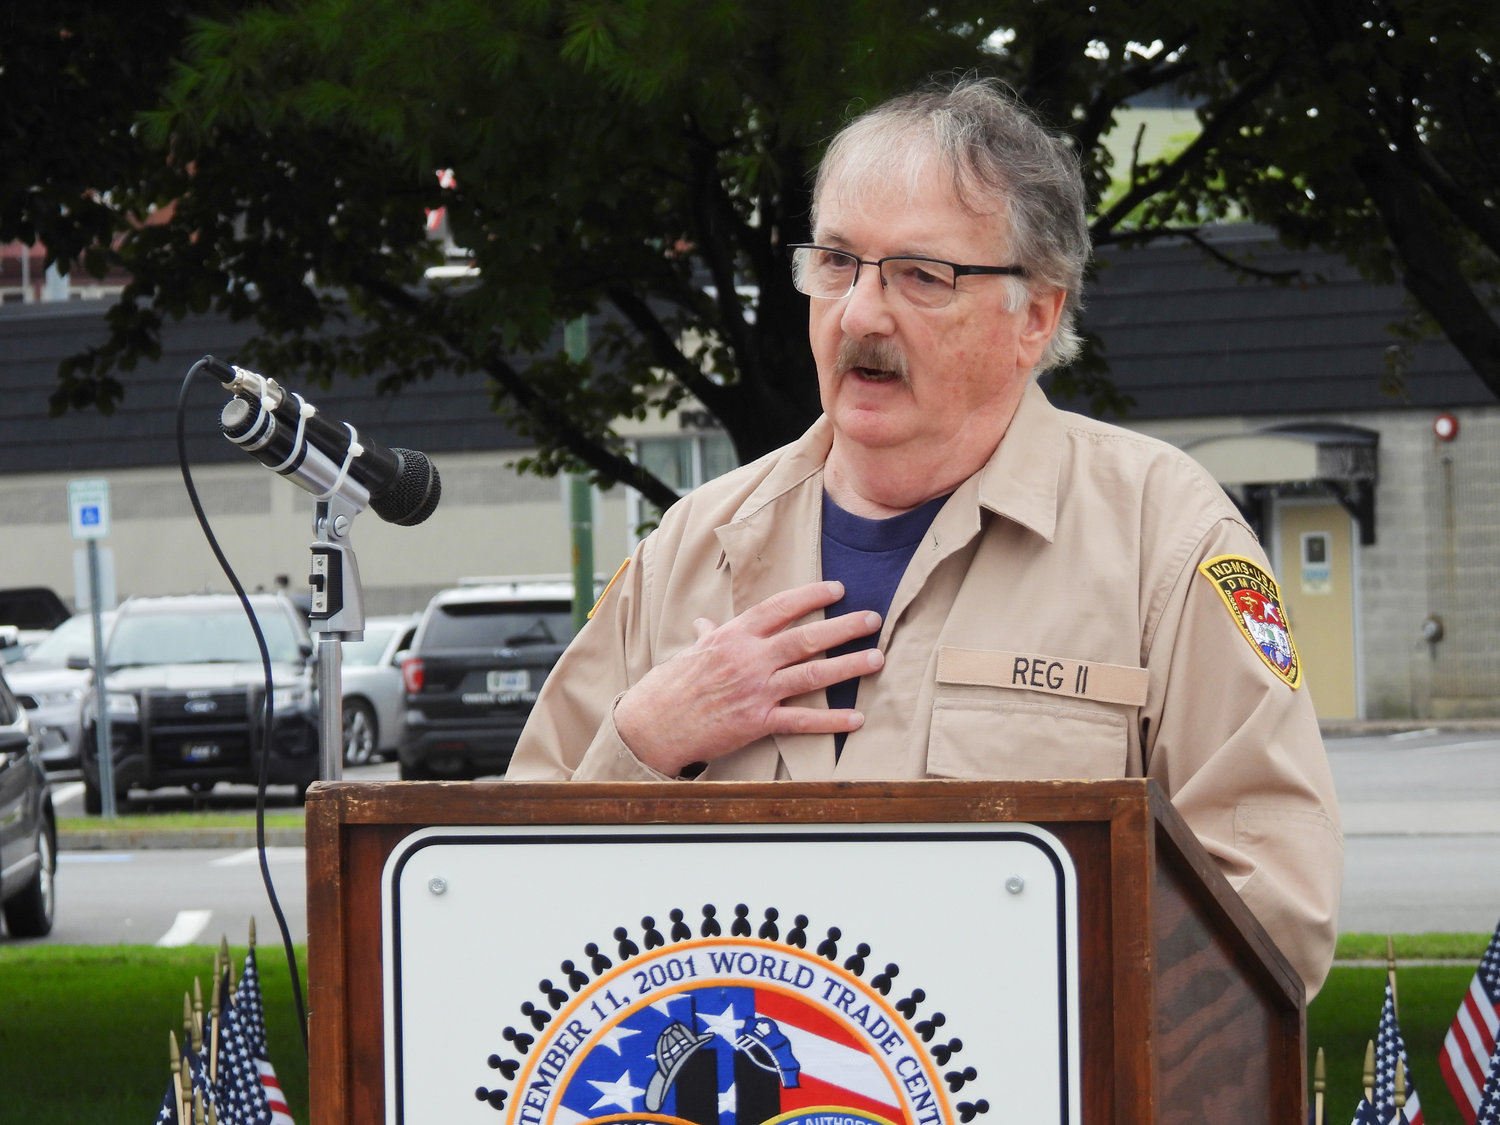 Former Madison County Undersheriff Douglas Bailey speaks at the city of Oneida's 9/11 Ceremony on Sunday, recounting his time as a member of the Federal National Disaster Medical System's Disaster Mortuary Response Team during 9/11